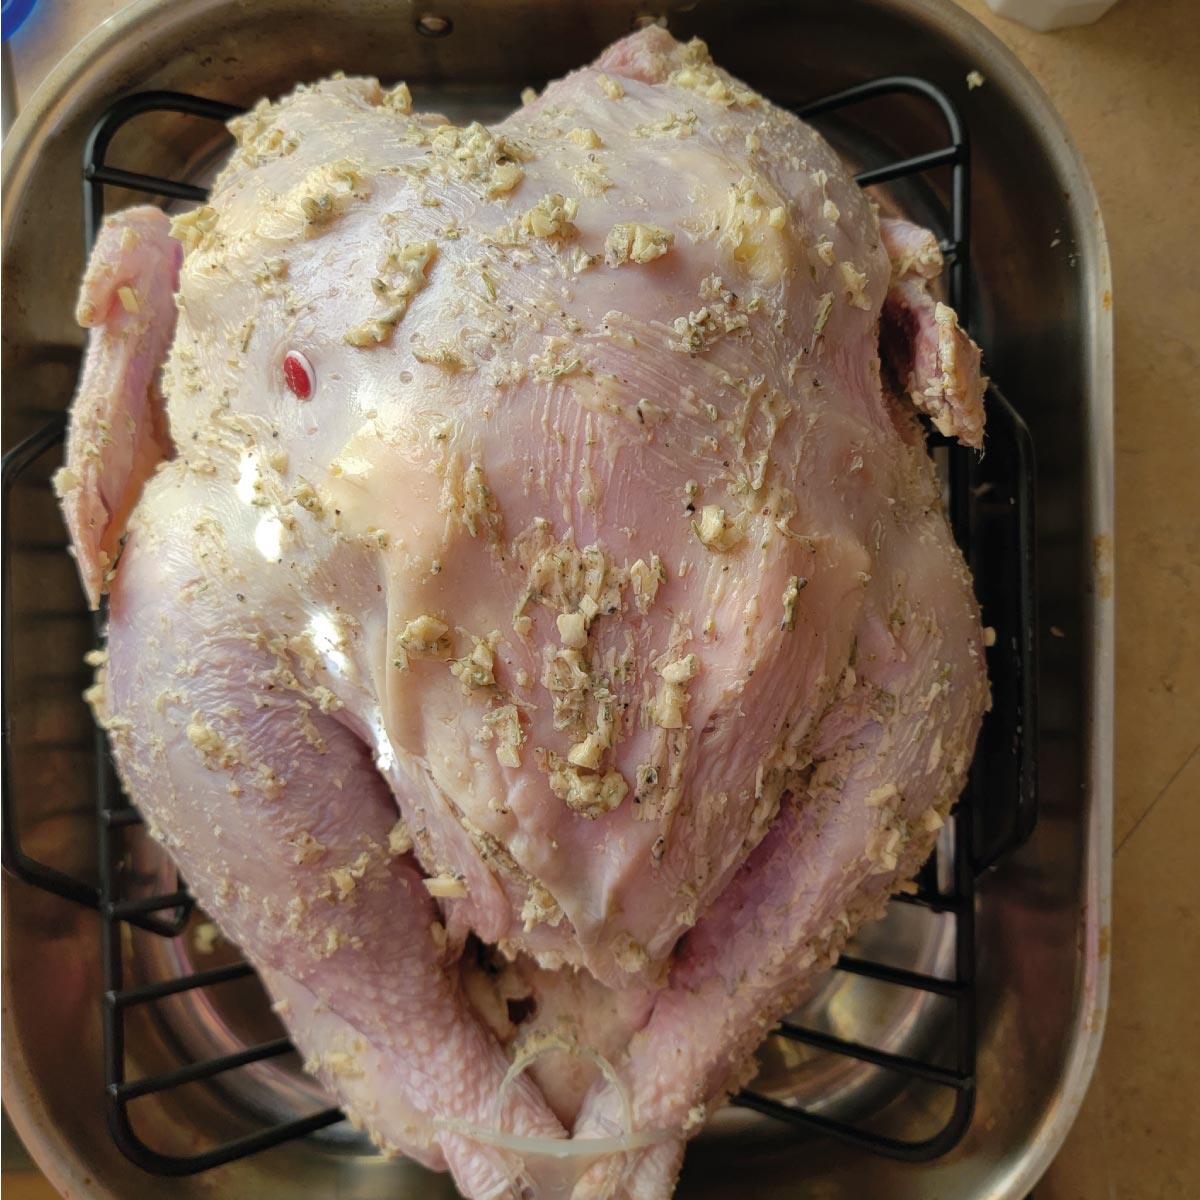 Turkey in a roasting pan with seasoning mix brushed all over and ready to go in the oven.